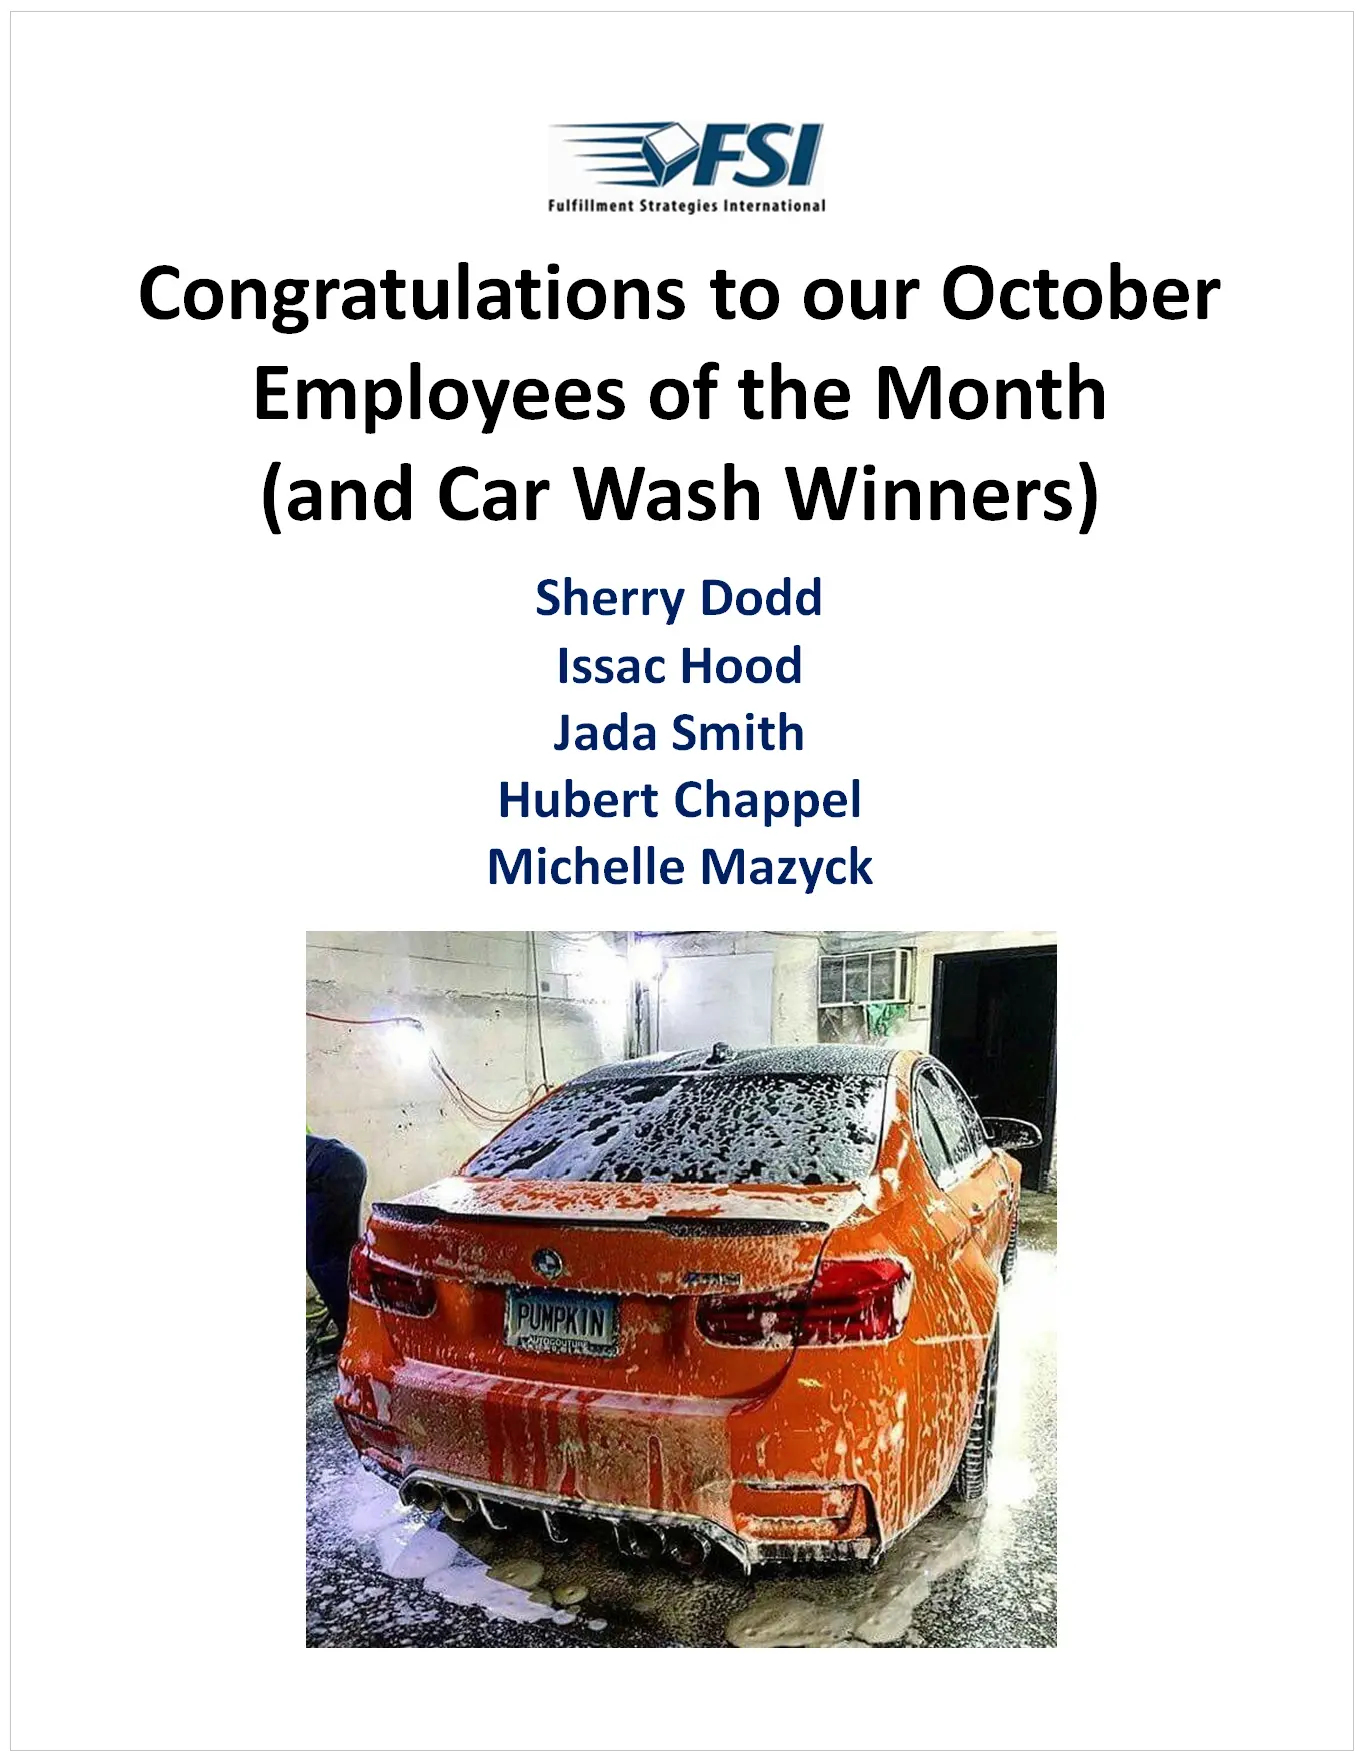 FSI October Employees of the Month and Car Wash Winners—Sherry Dodd, Issac Hood, Jada Smith, Hubert Chappel, and Michelle Mazyck—are celebrated for their outstanding contributions in shipping and logistics. Below is a photo of an orange car being washed with soap.